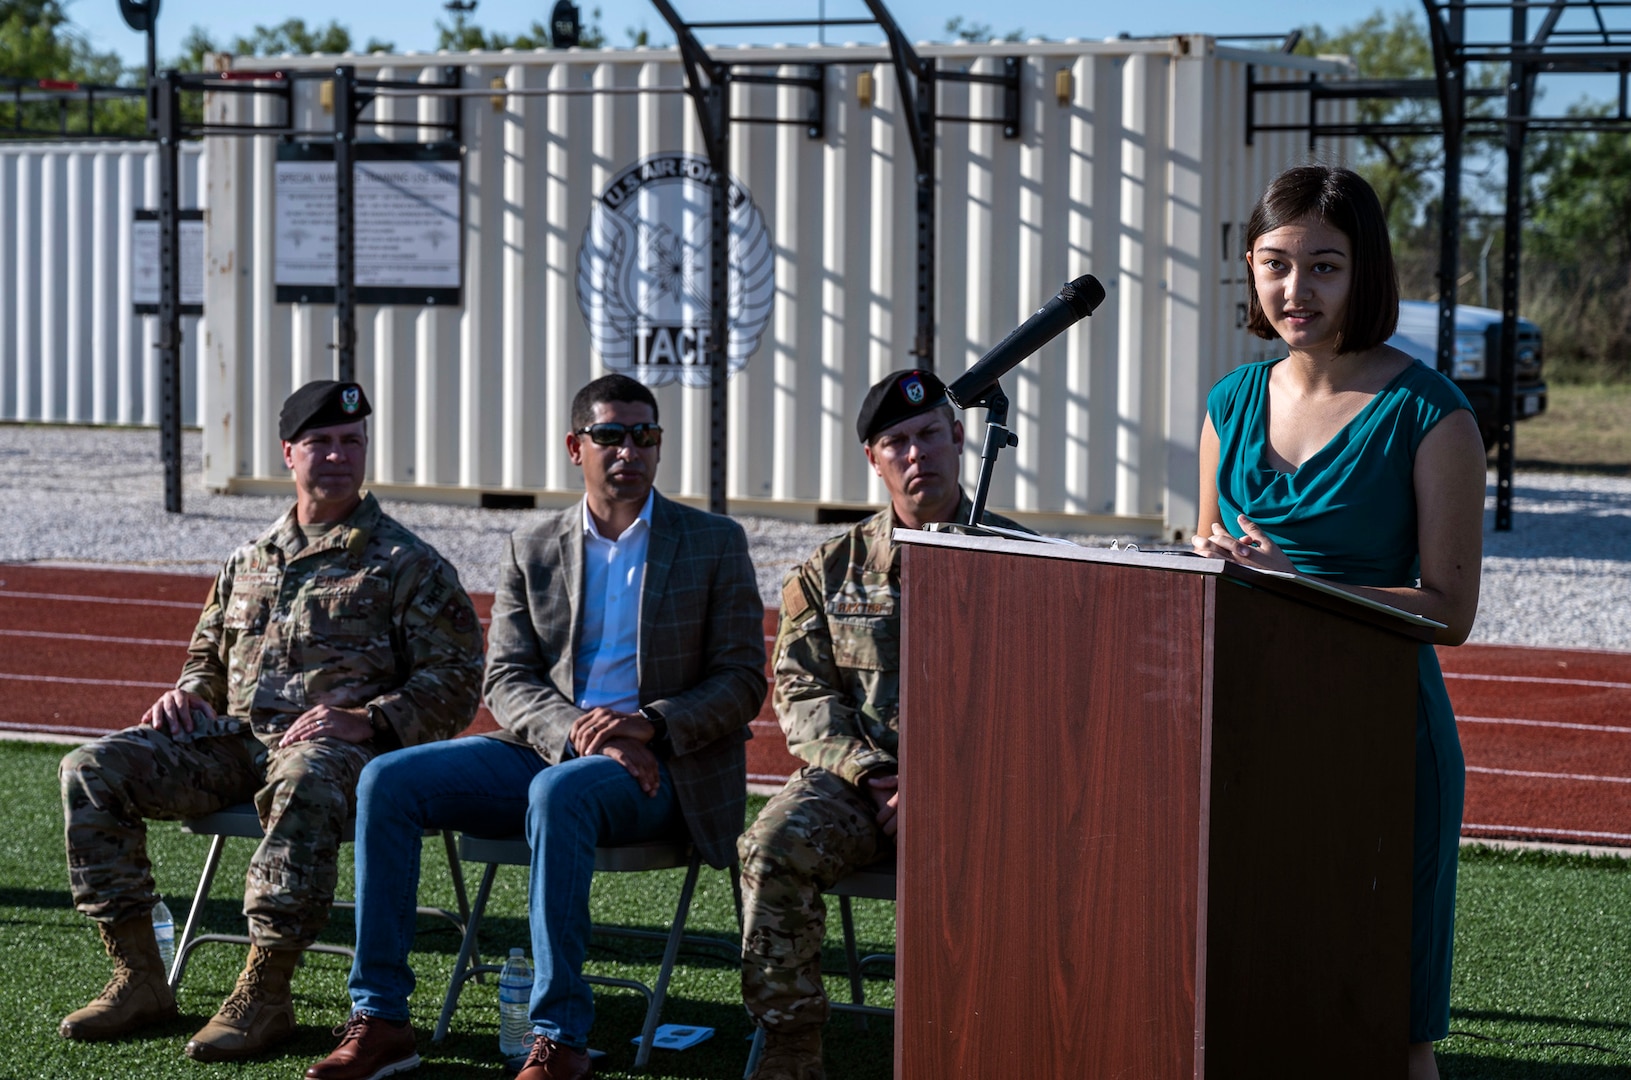 female military dependent standing at podium giving a speech